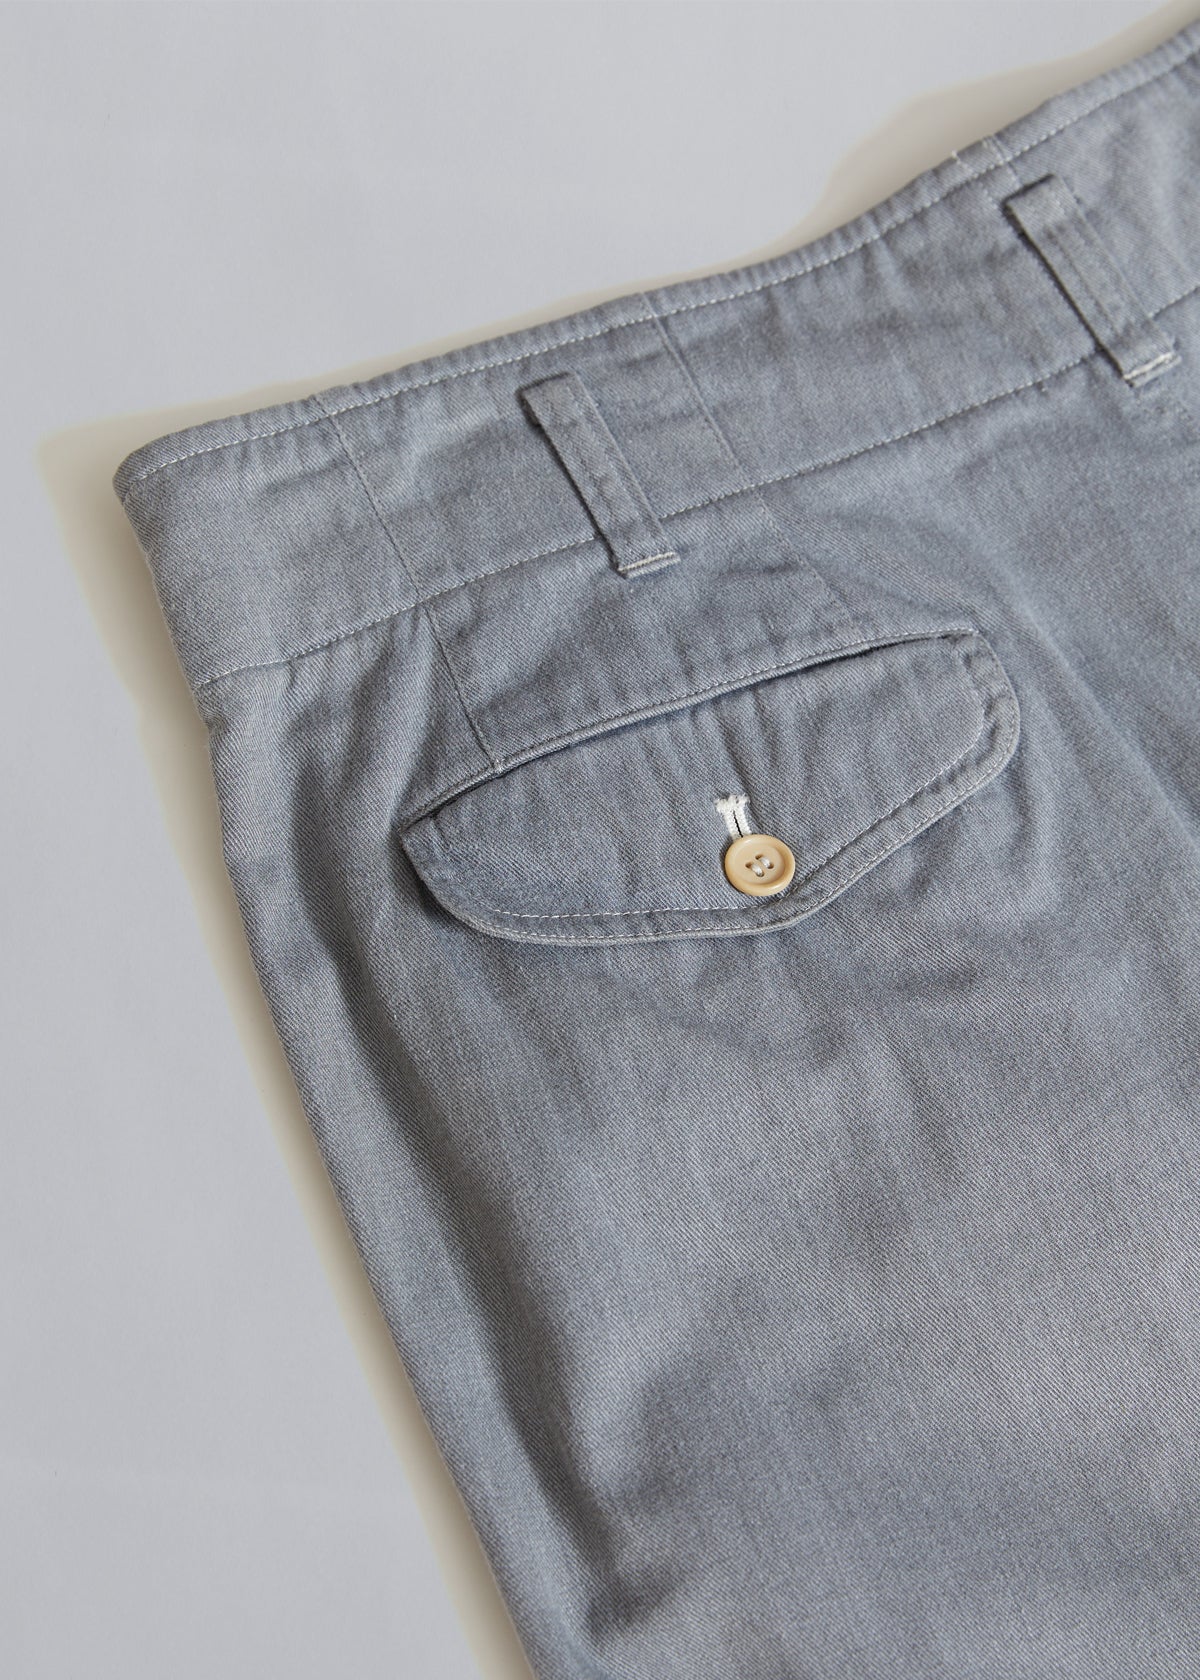 CDG Homme Grey Relaxed Cotton Pants 1990's - Medium